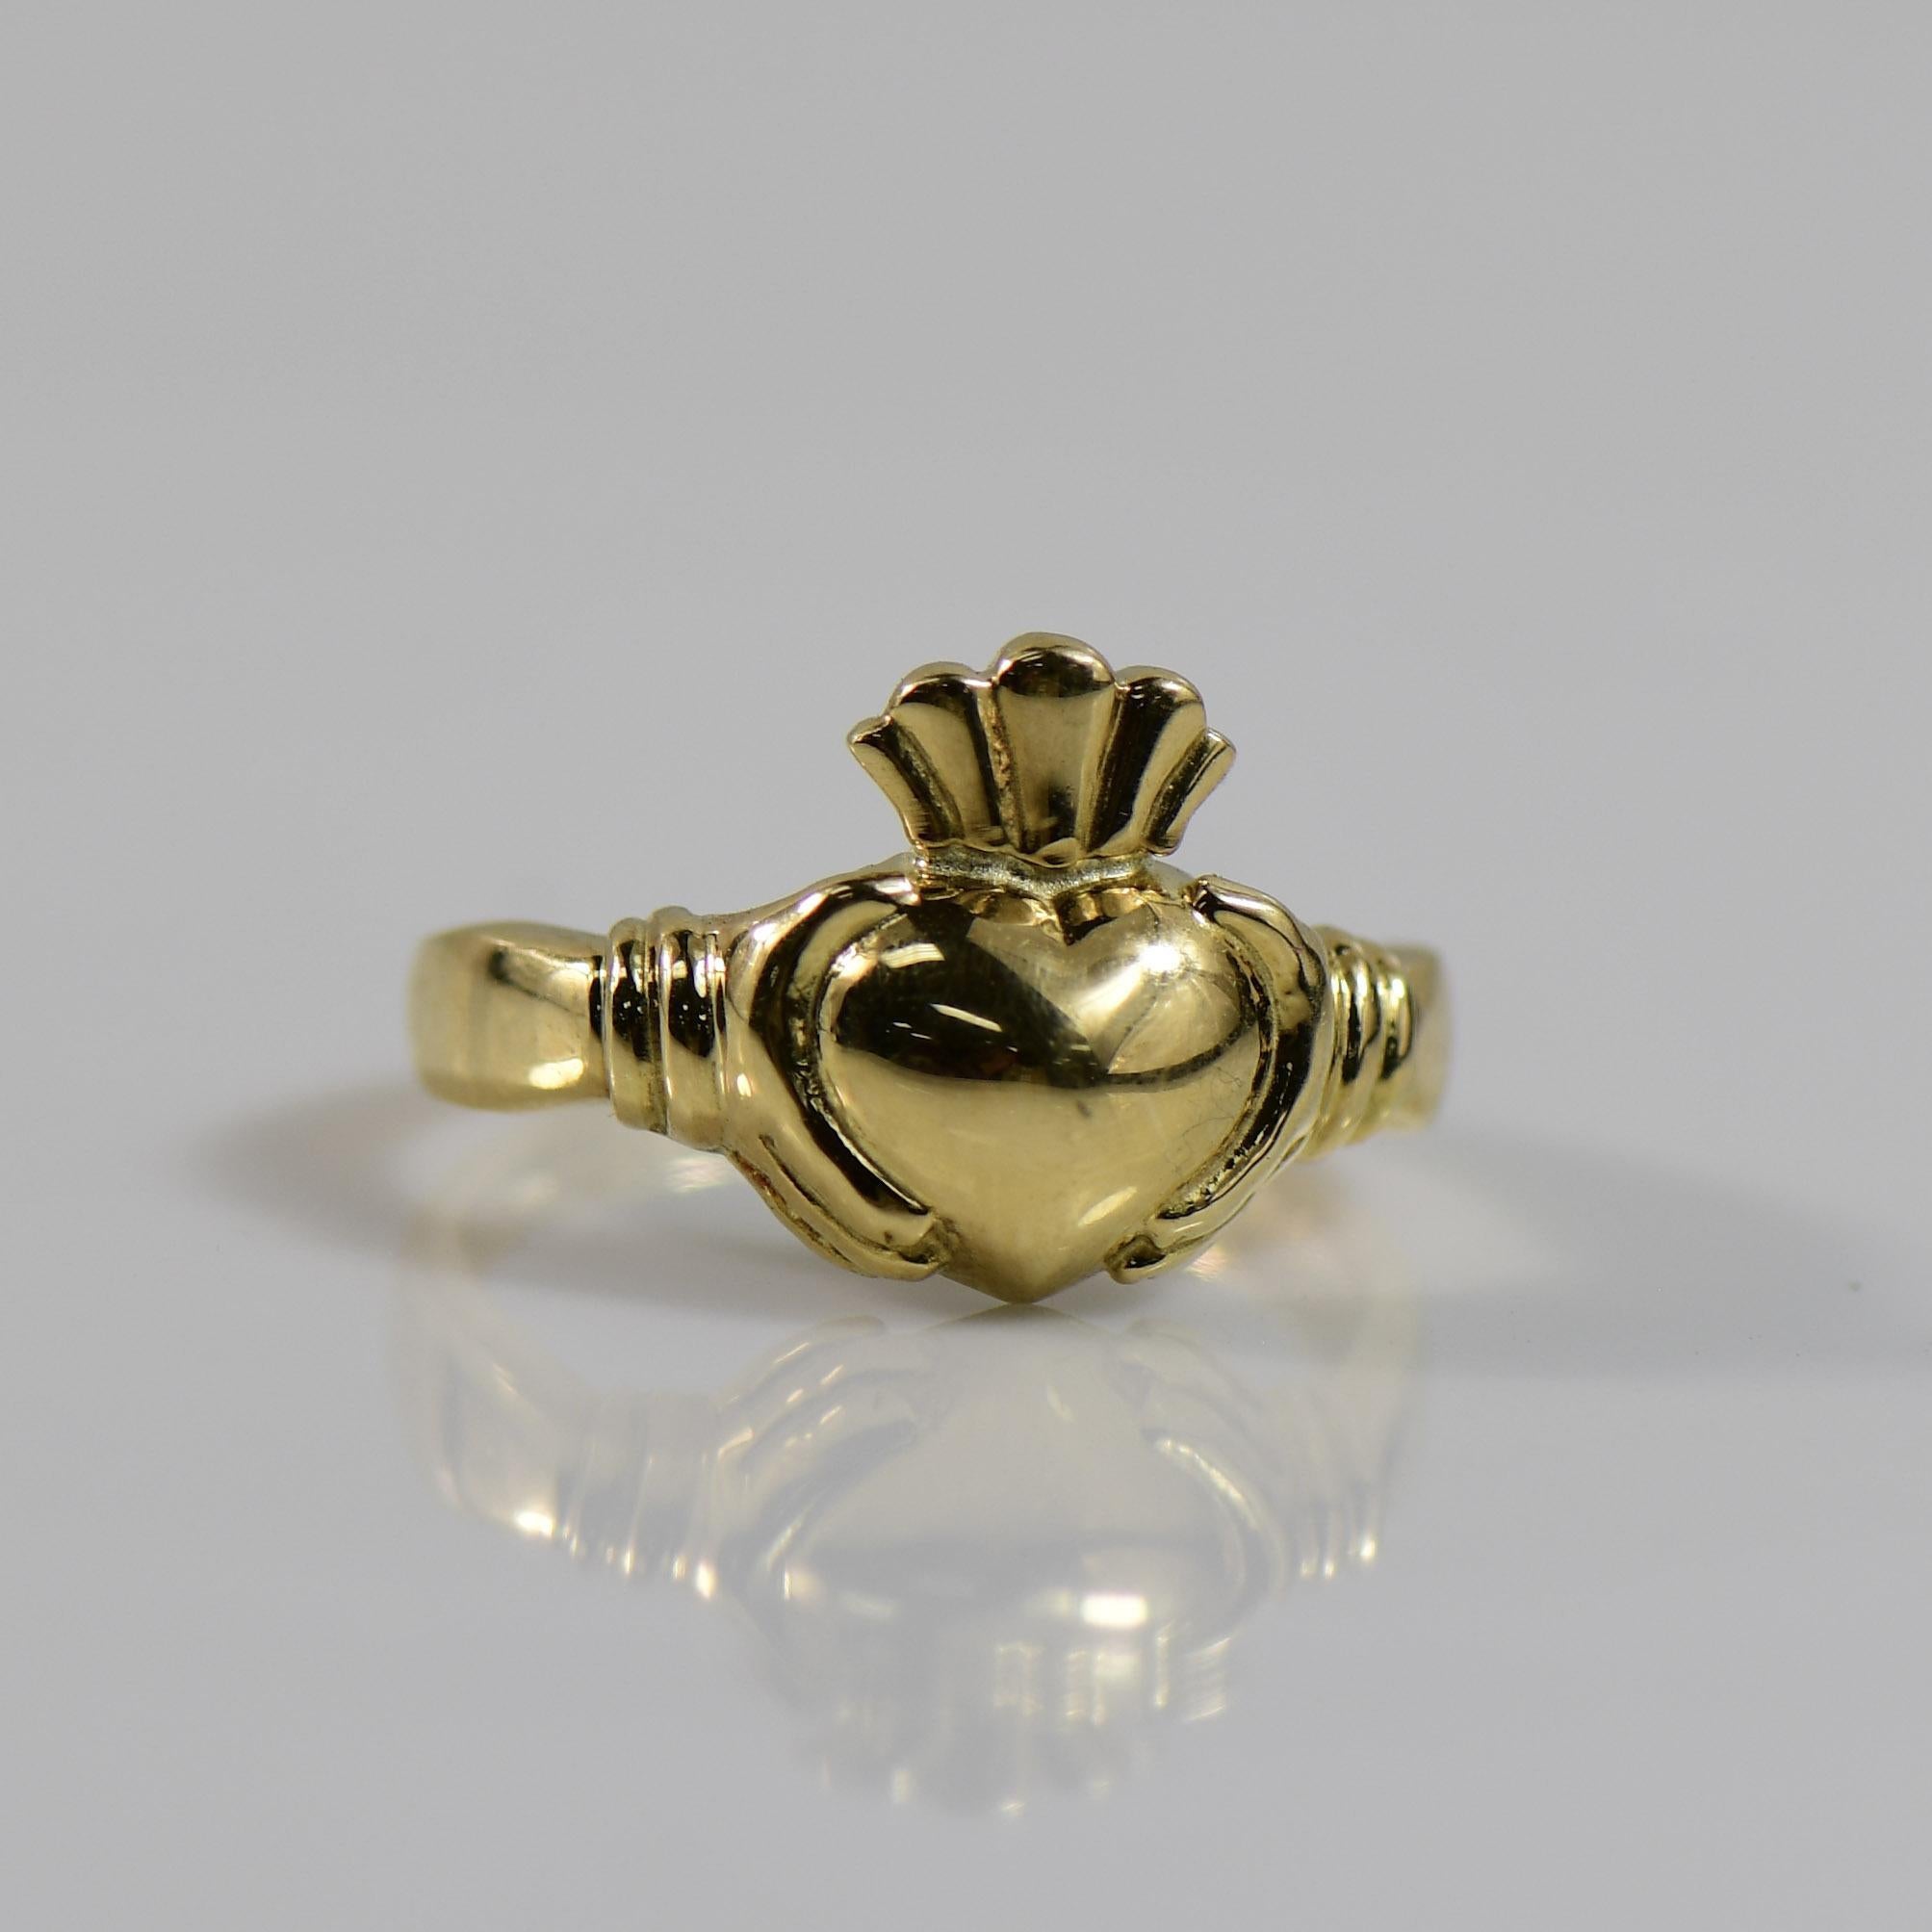 Crafted in radiant 18K yellow gold, this Claddagh ring is a symbol of enduring love and friendship. The heart, crowned and clasped between two hands, represents love, loyalty, and friendship, making it a meaningful and timeless piece of jewelry. The